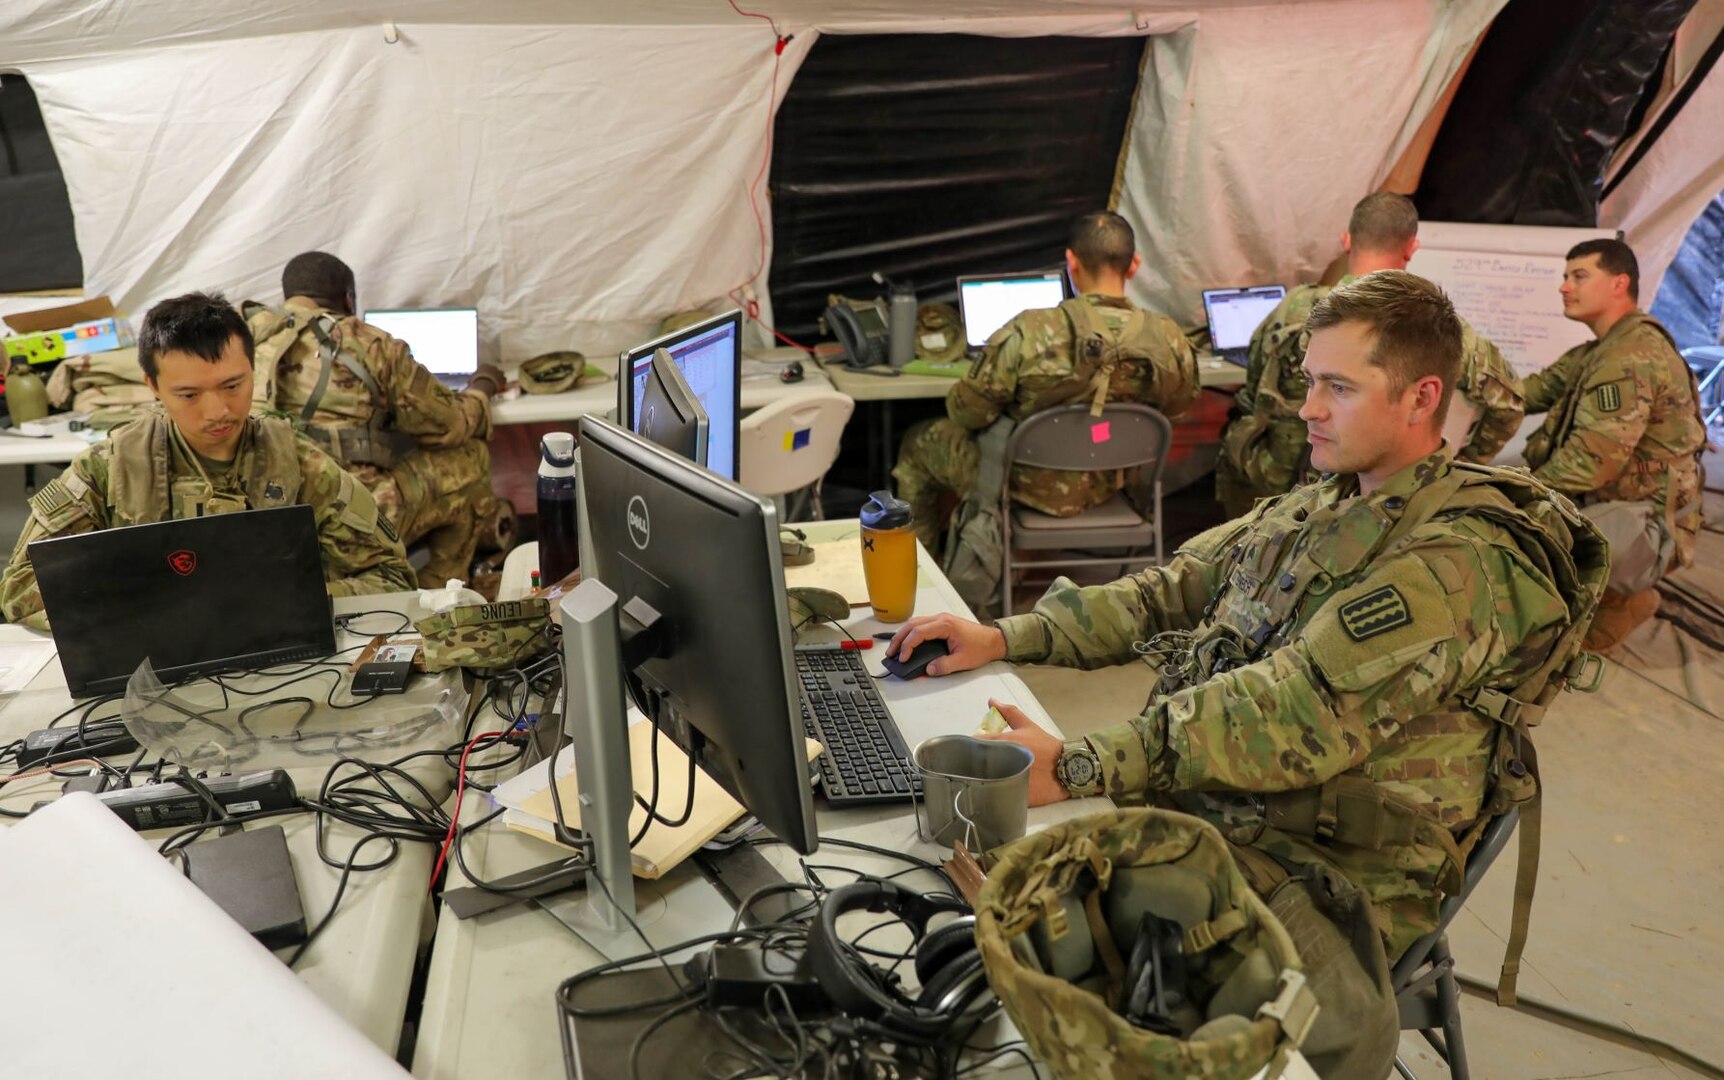 529th CSSB Soldiers endure heat, gain valuable training during JRTC rotation